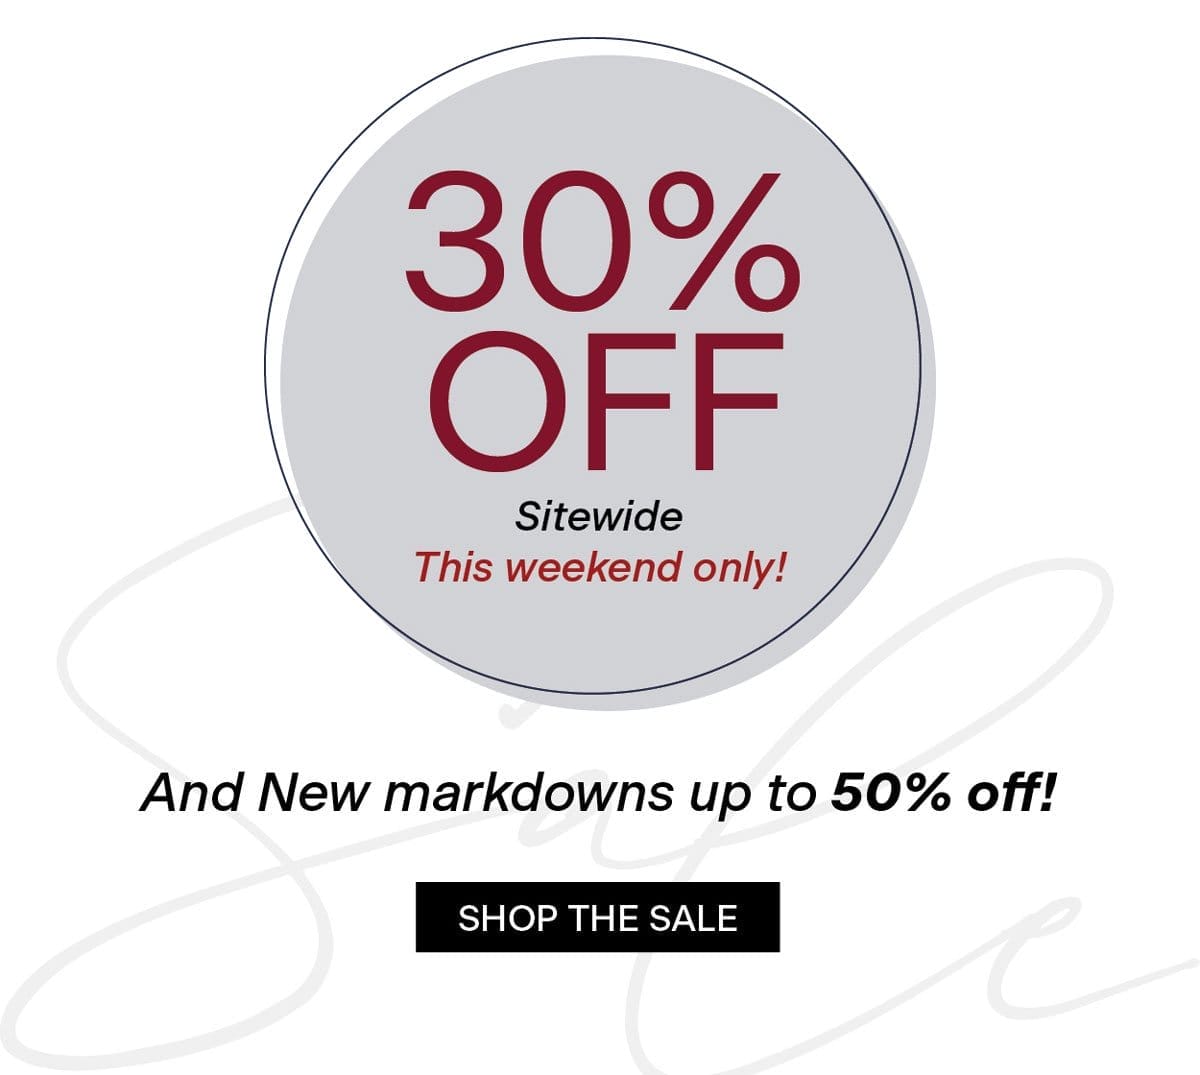 30% off sitewide this weekend only! and new markdowns up to 50% off!